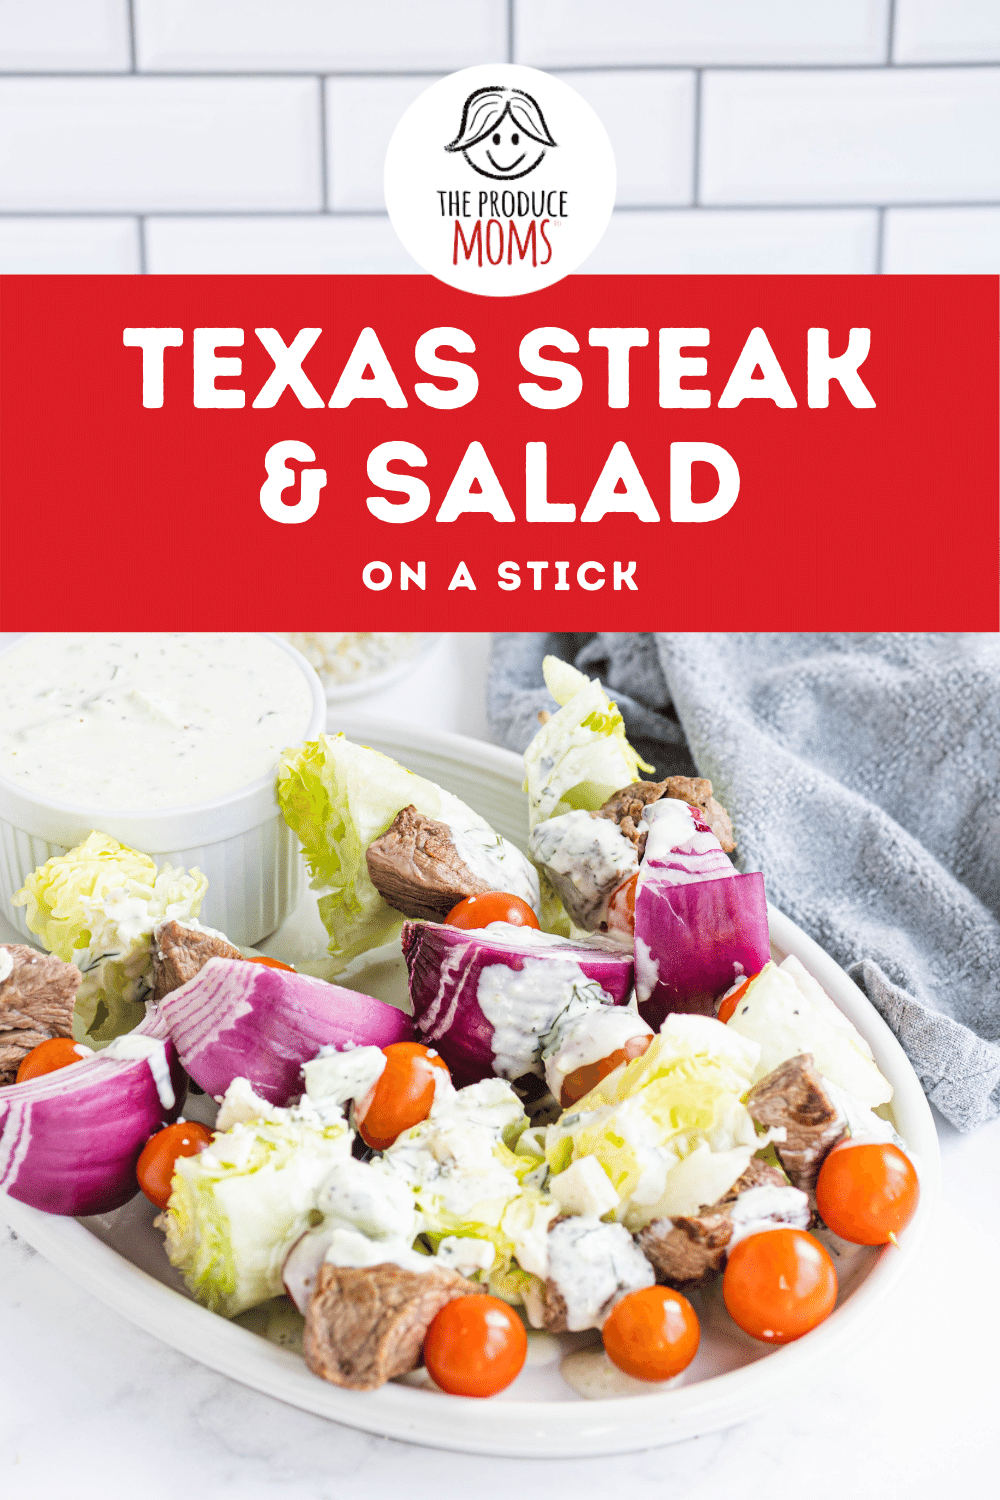 Texas Steak and Salad on a Stick